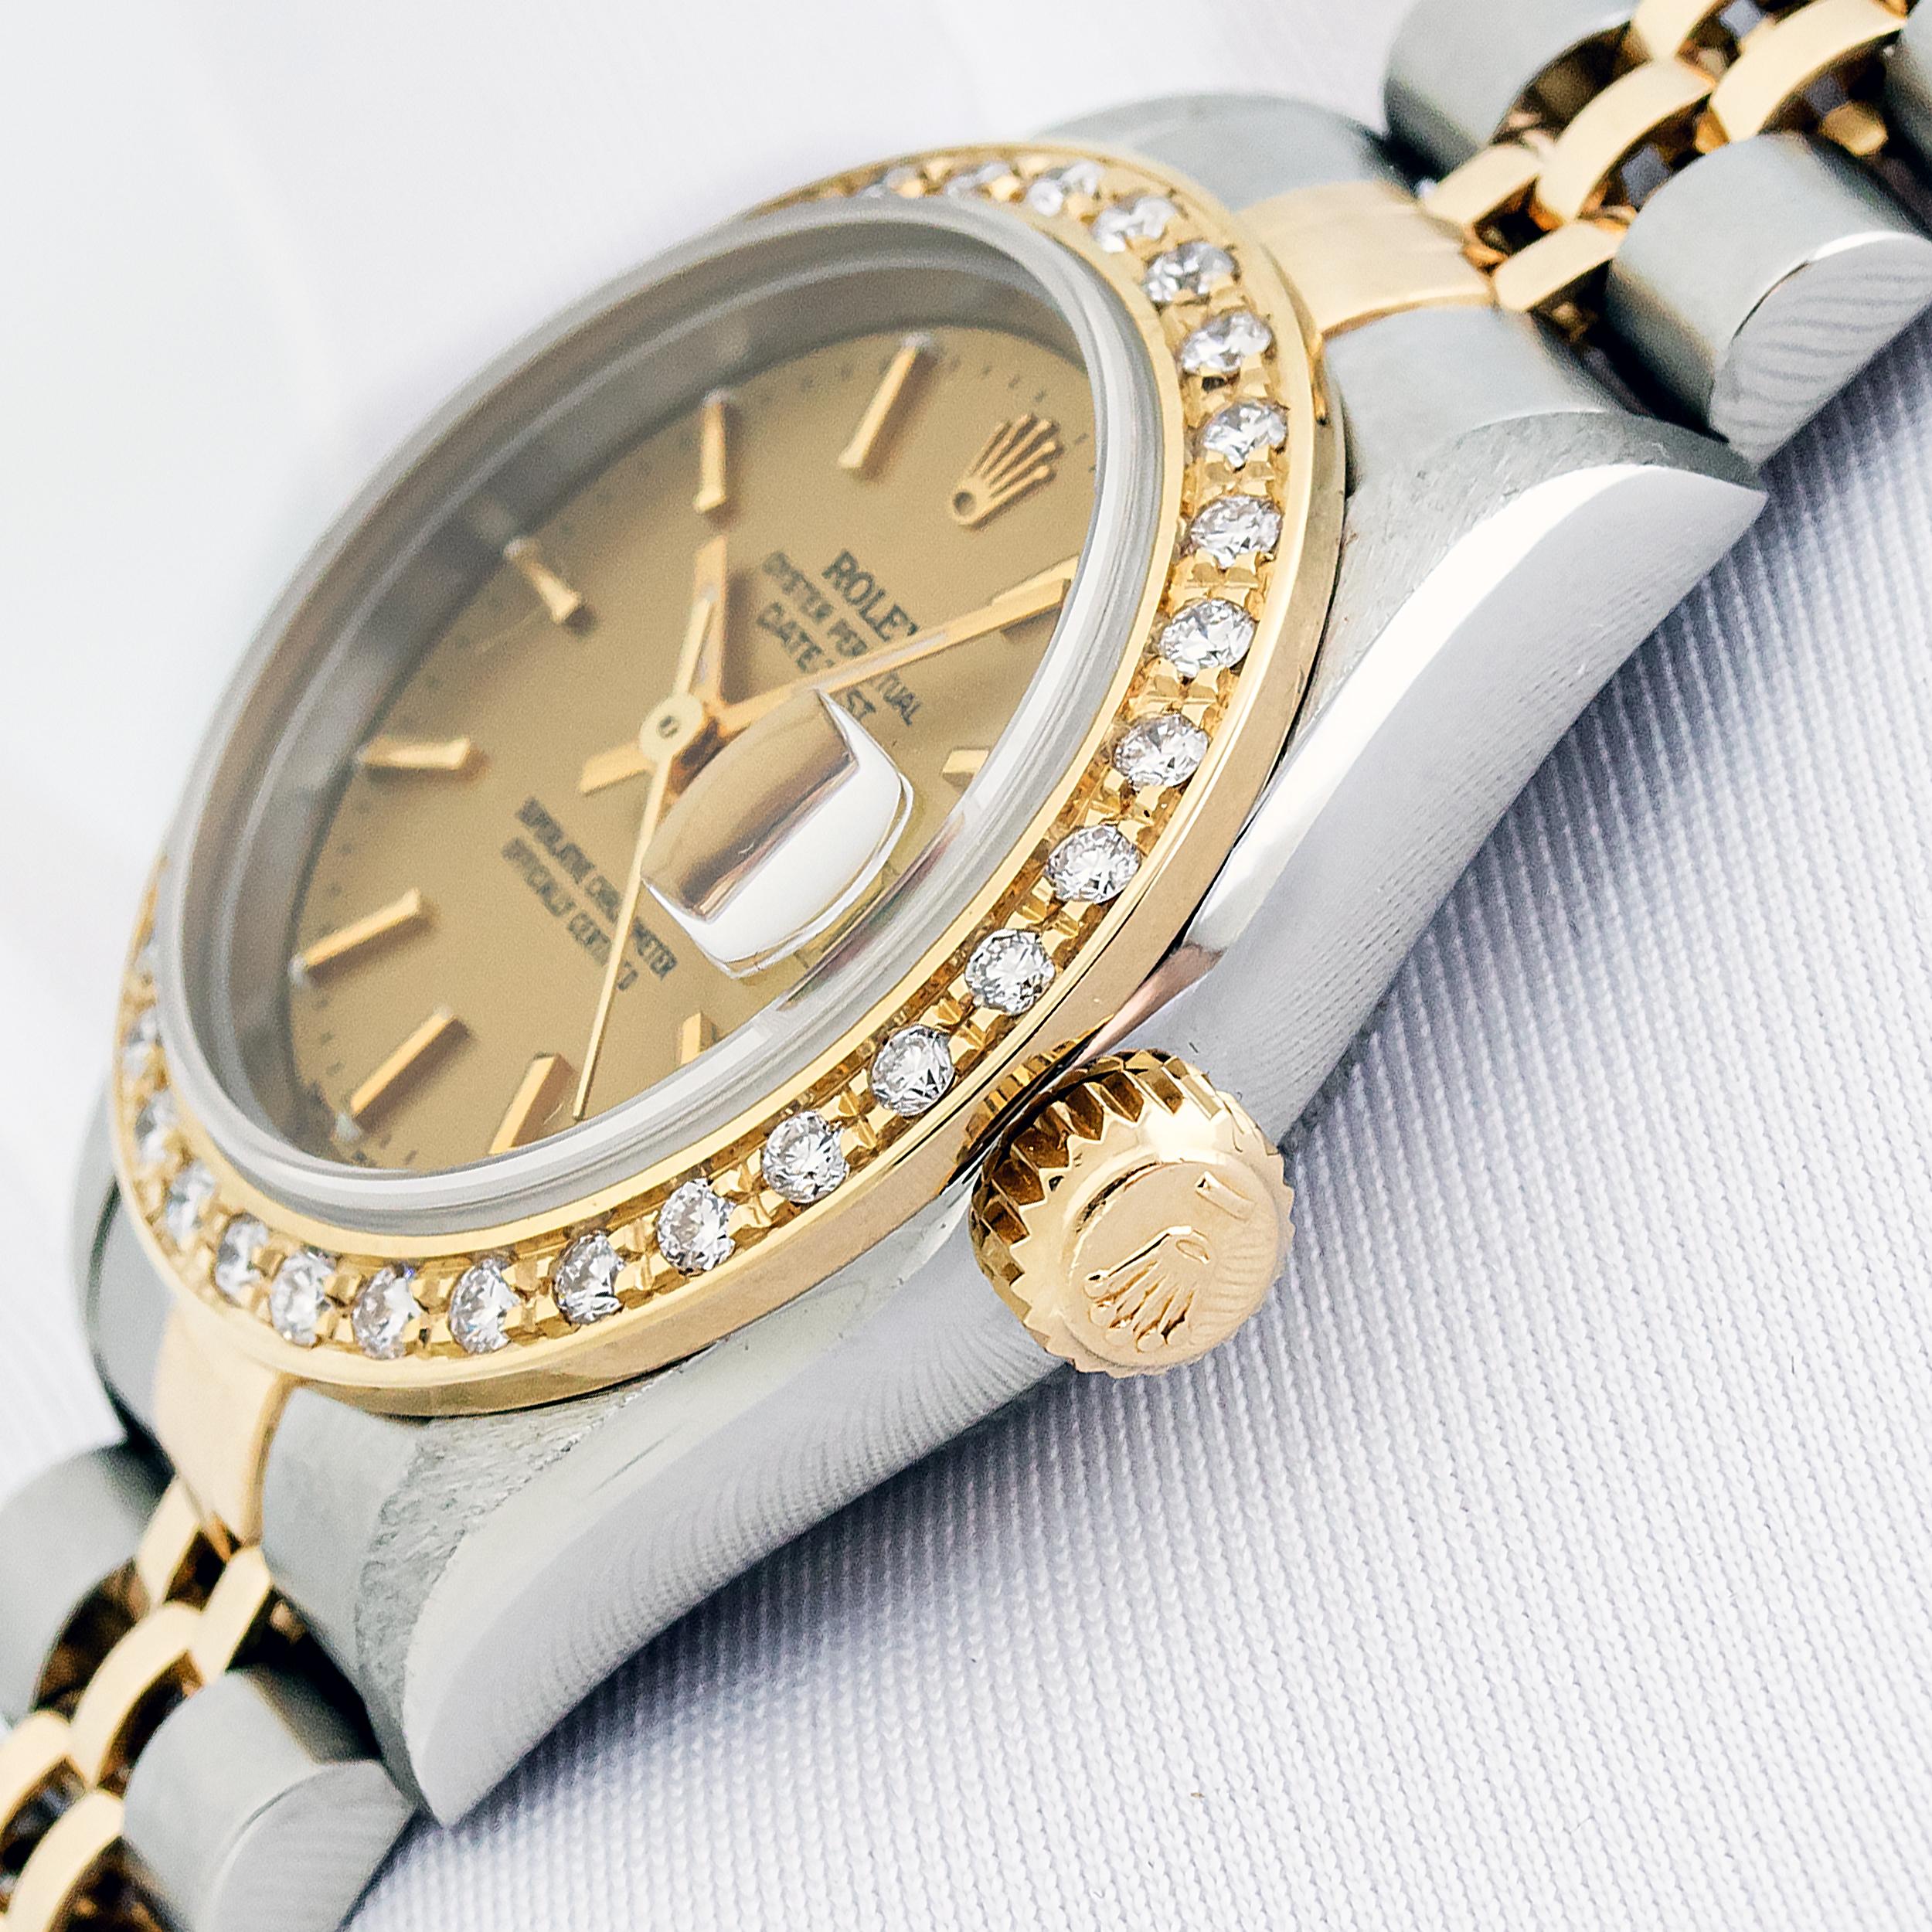 Rolex Lady Datejust Watch 79173 Steel - 18K Gold Index Diamond Bezel Watch In Good Condition For Sale In Los Angeles, CA